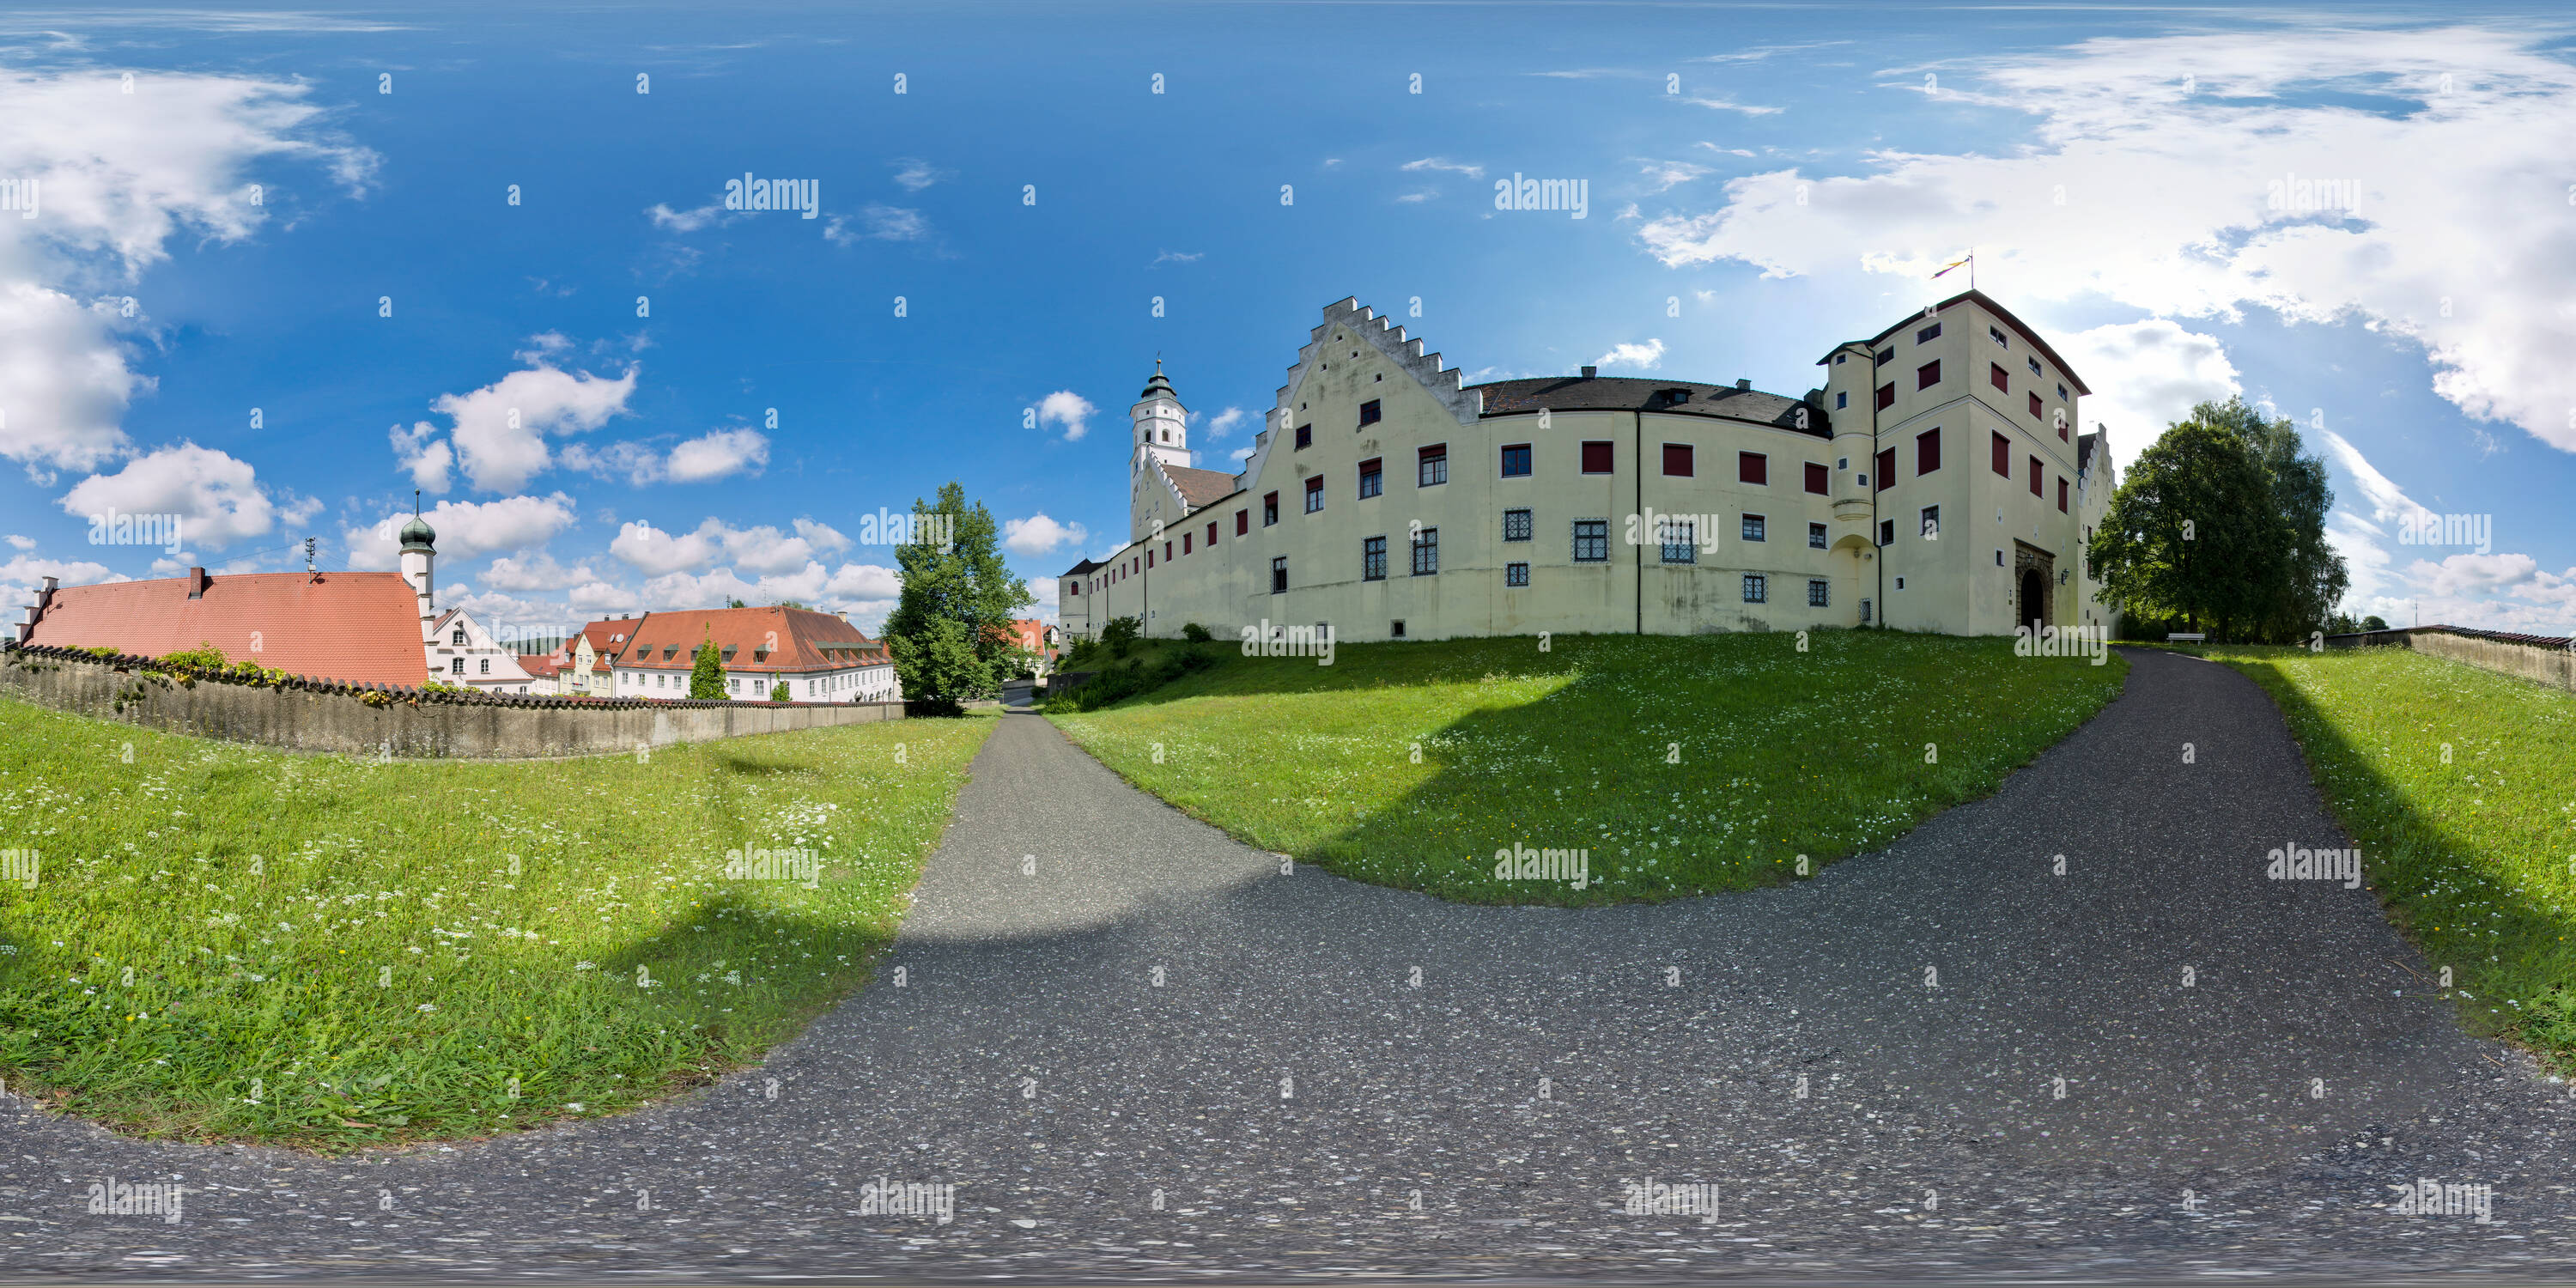 360 degree panoramic view of Fugger Castle and St Andreas Church, Babenhausen 2017-07